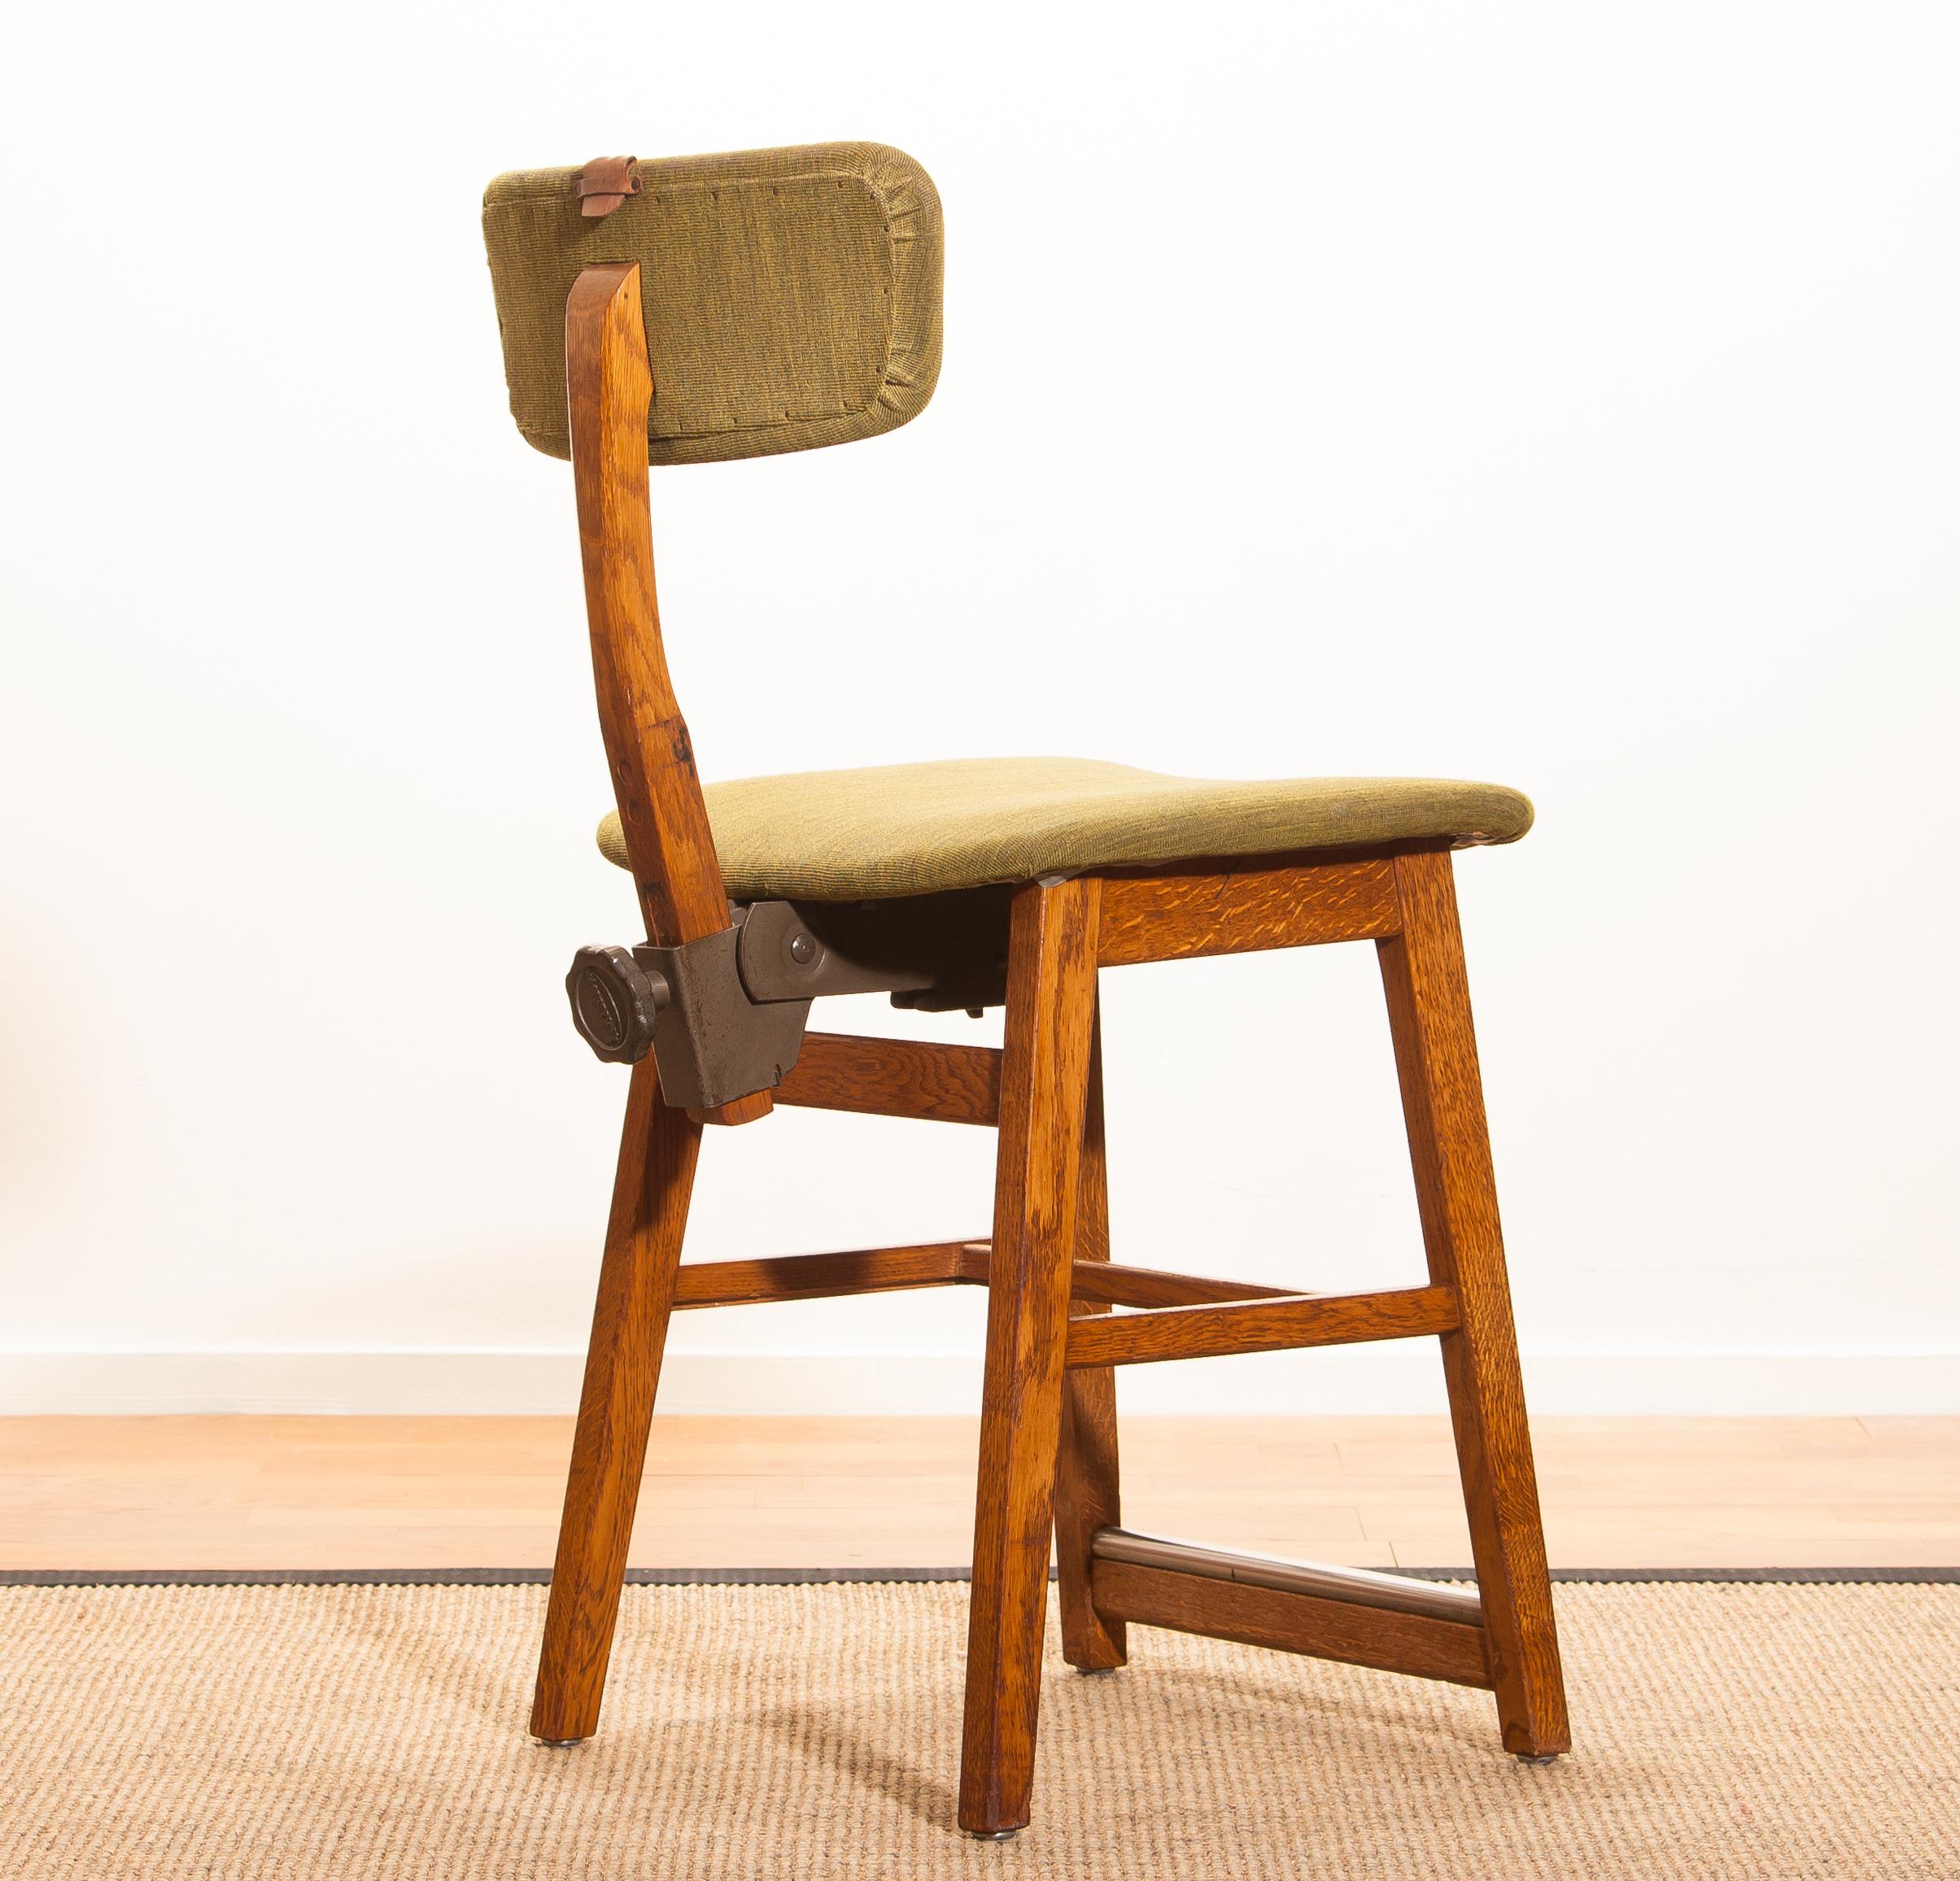 Swedish 1940s, Oak and Wool Desk Chair by Âtvidabergs, Sweden